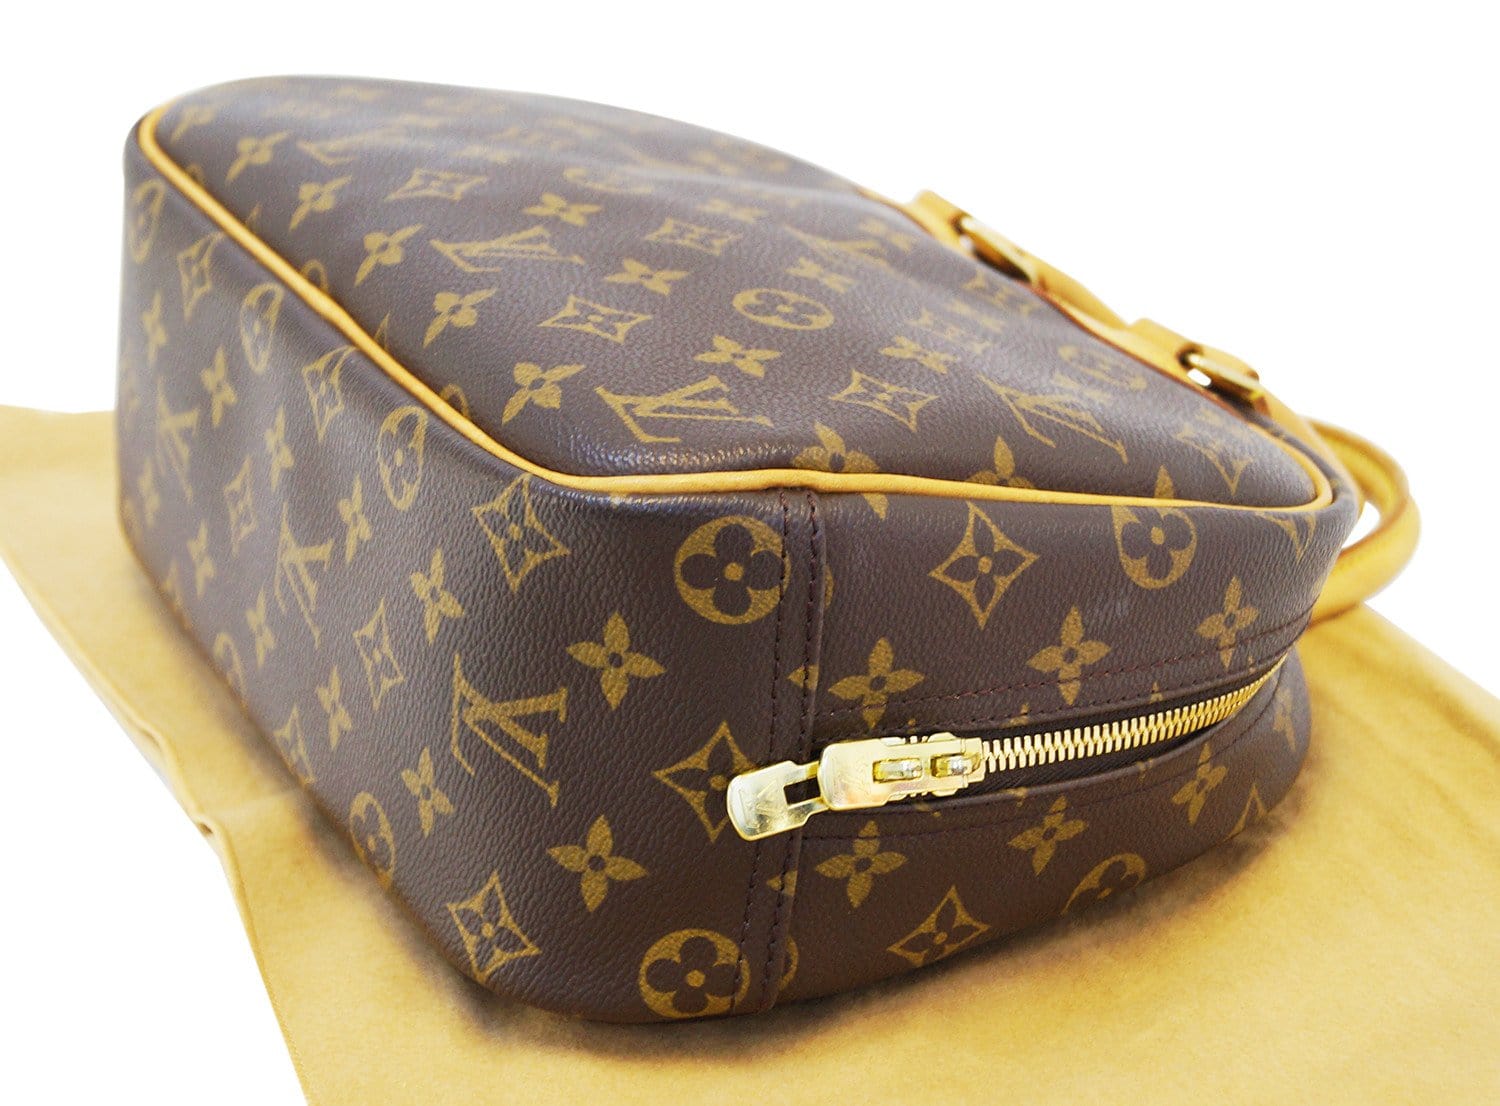 LOUIS VUITTON handbag TROUVILLE PM, collection 2004. — Discover Rare and  Captivating Sold Pieces, Find Your Collectibles